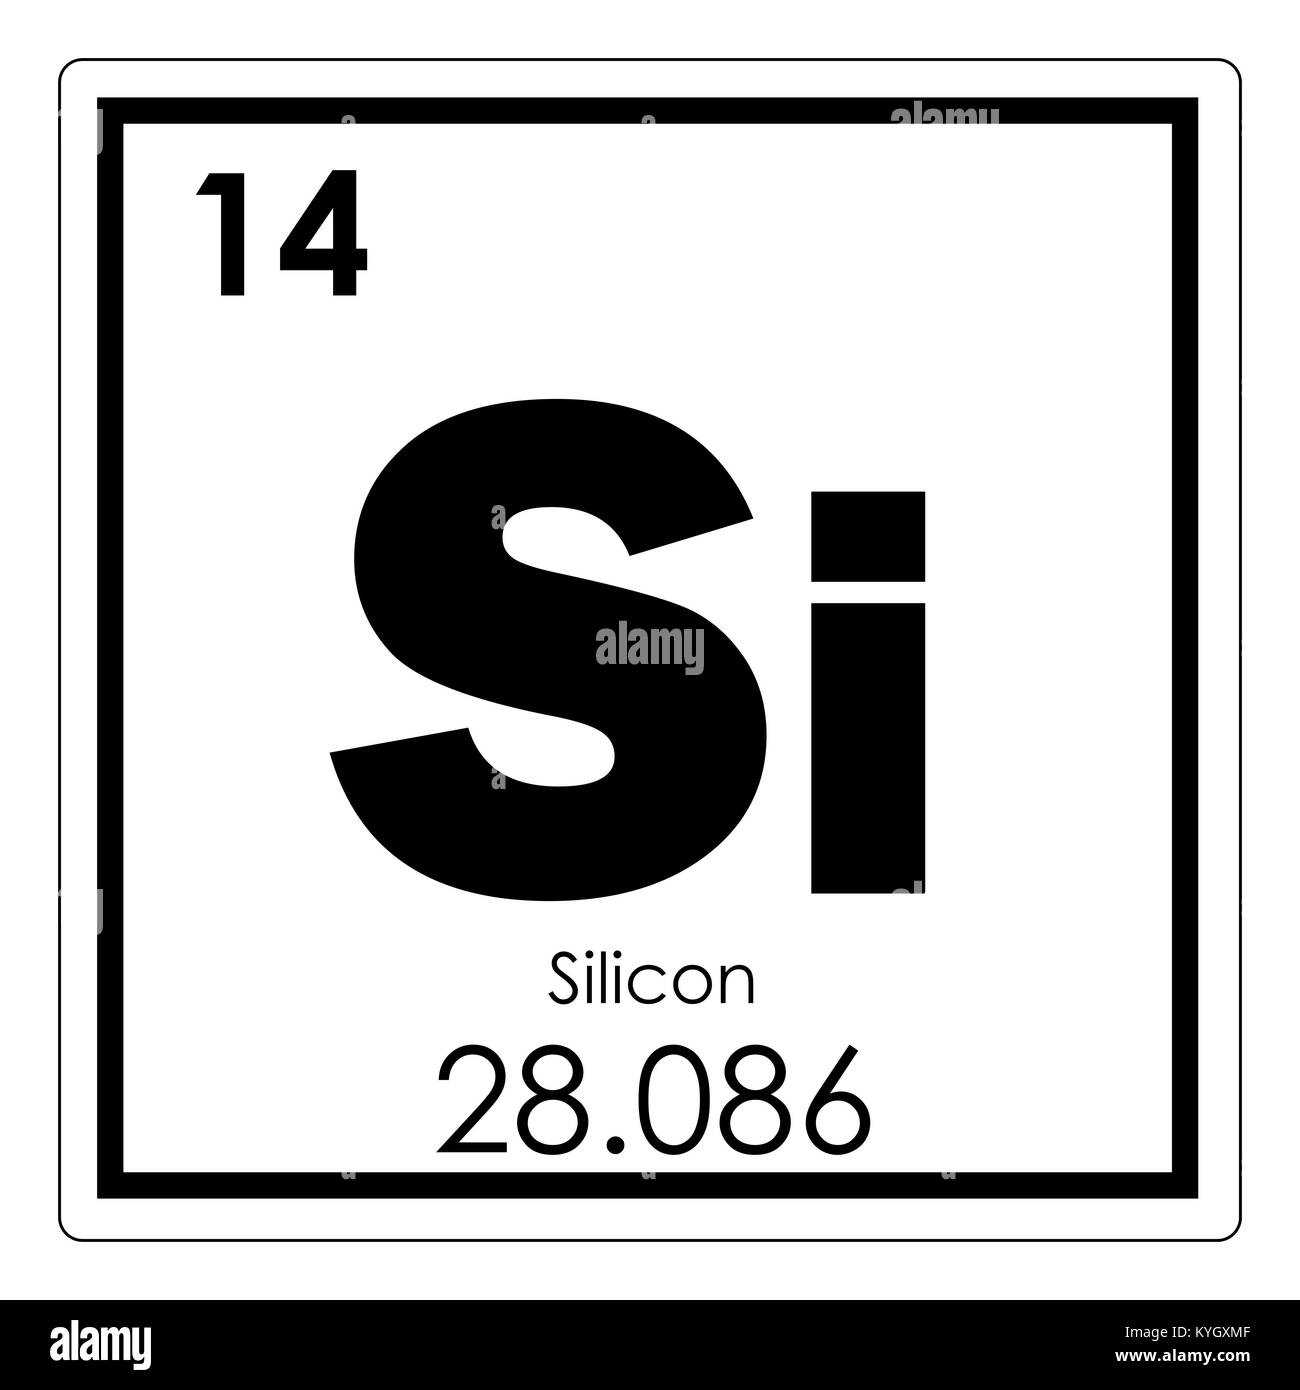 Silicon chemical element periodic table science symbol Stock Photo - Alamy